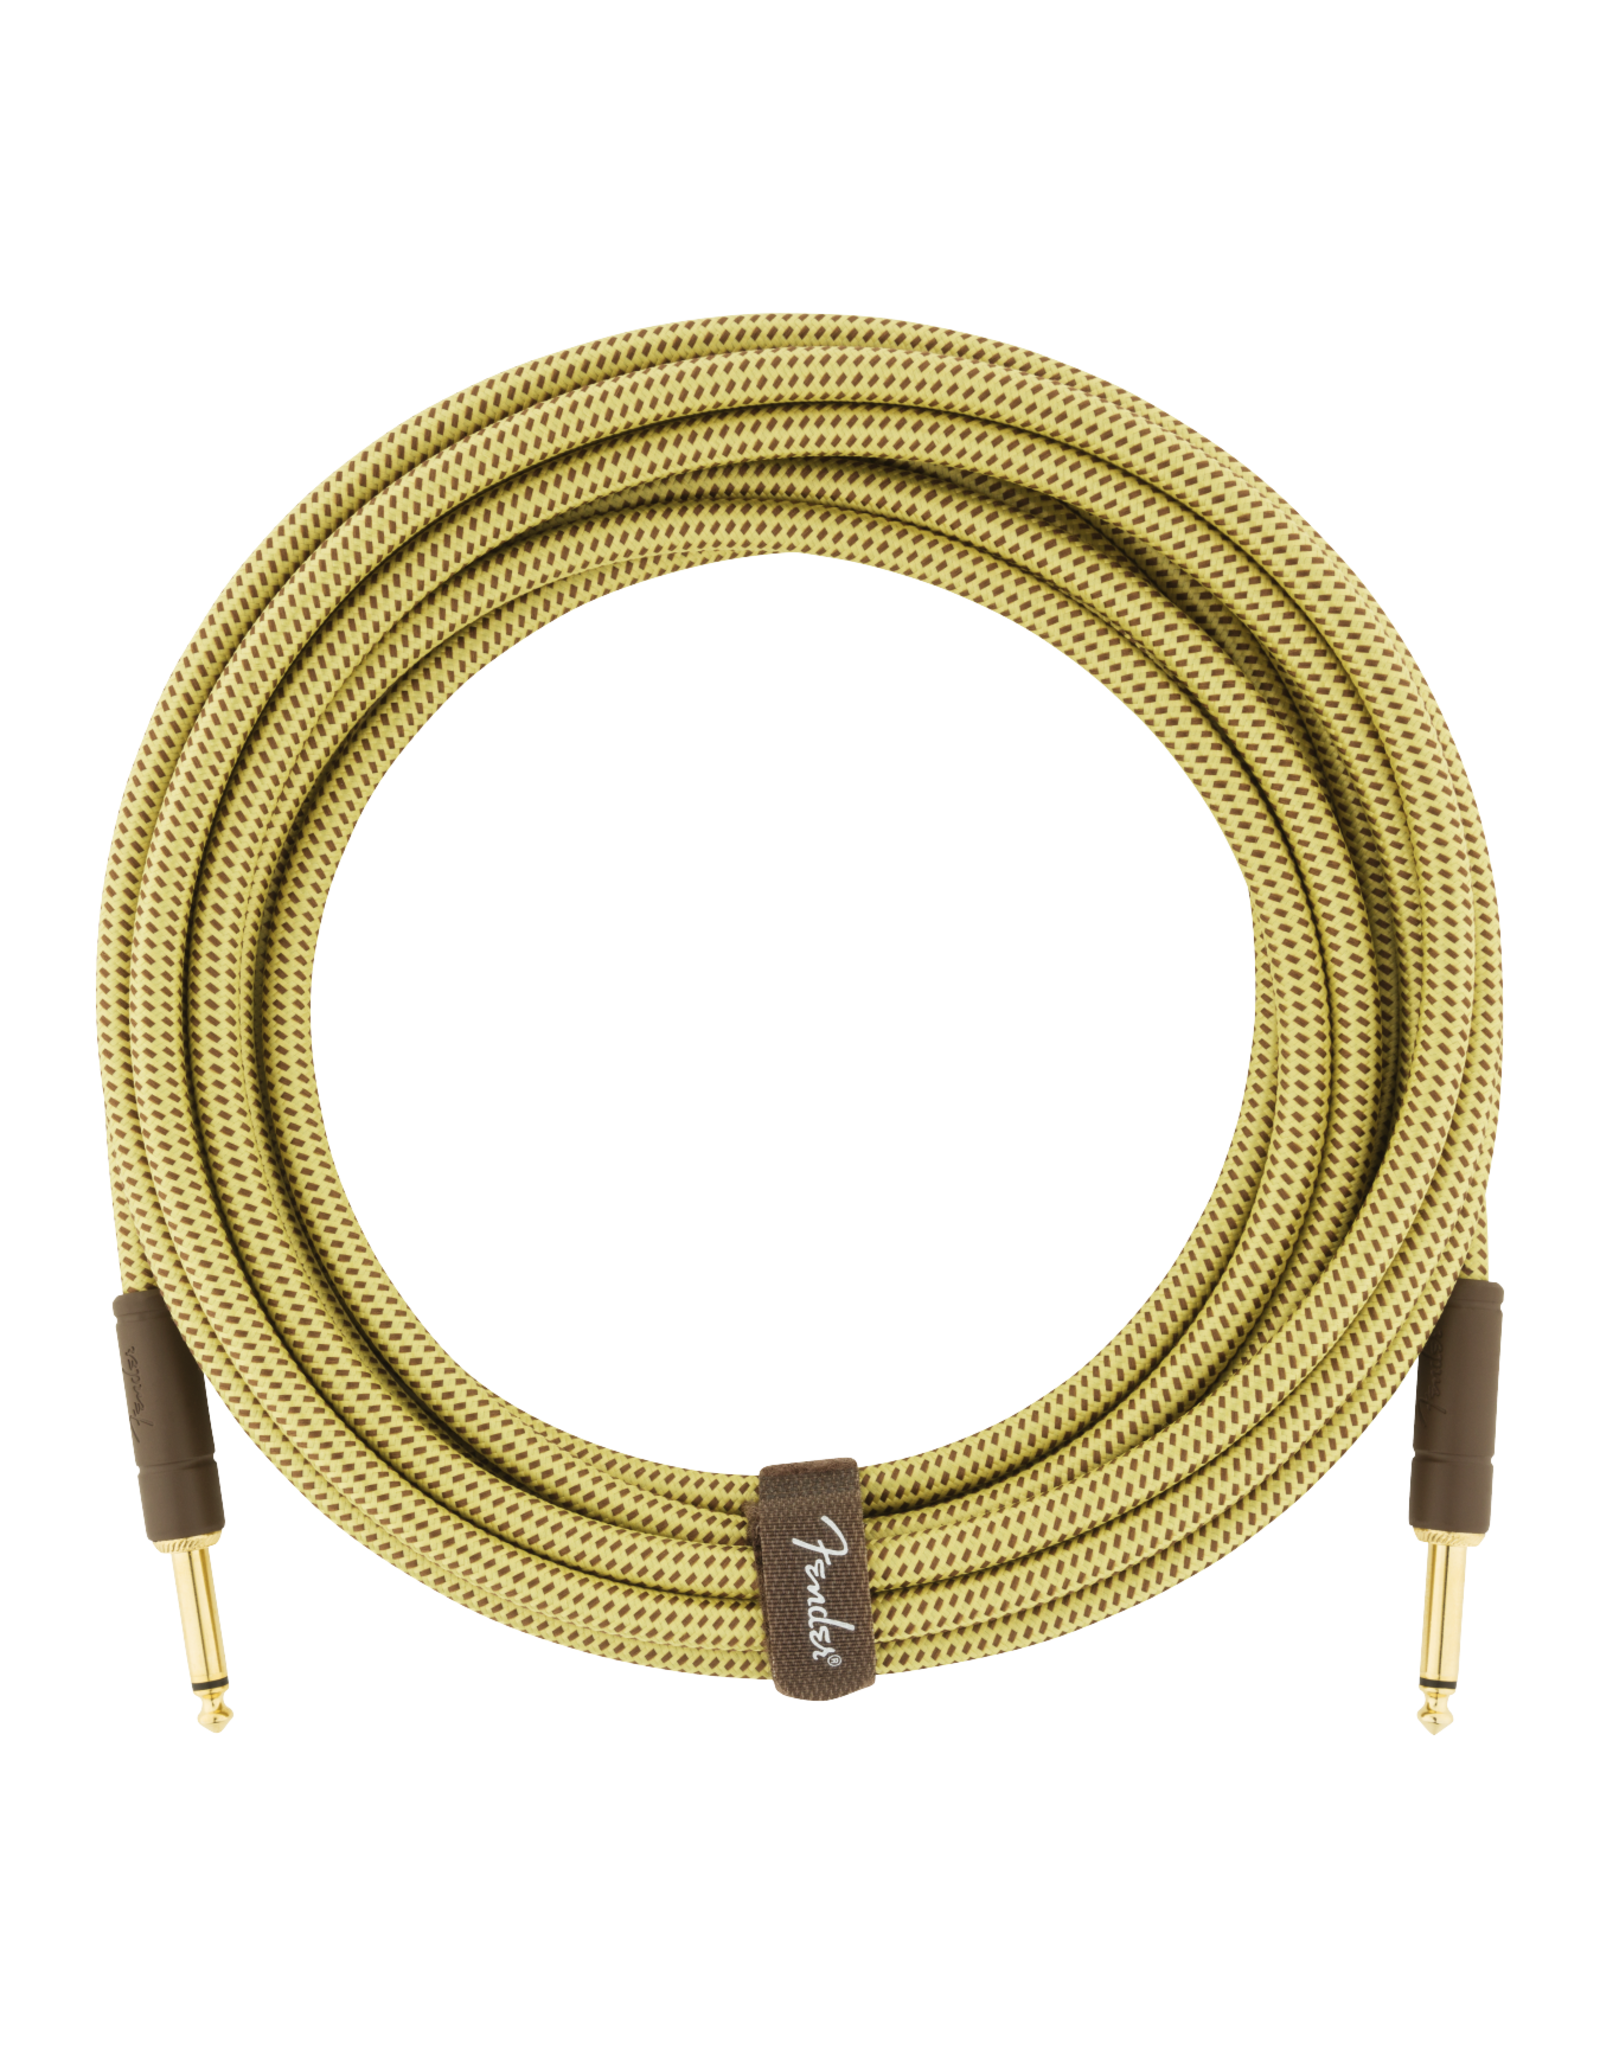 Fender Fender Deluxe Series Instrument Cable, Straight/Straight, 18.6', Tweed